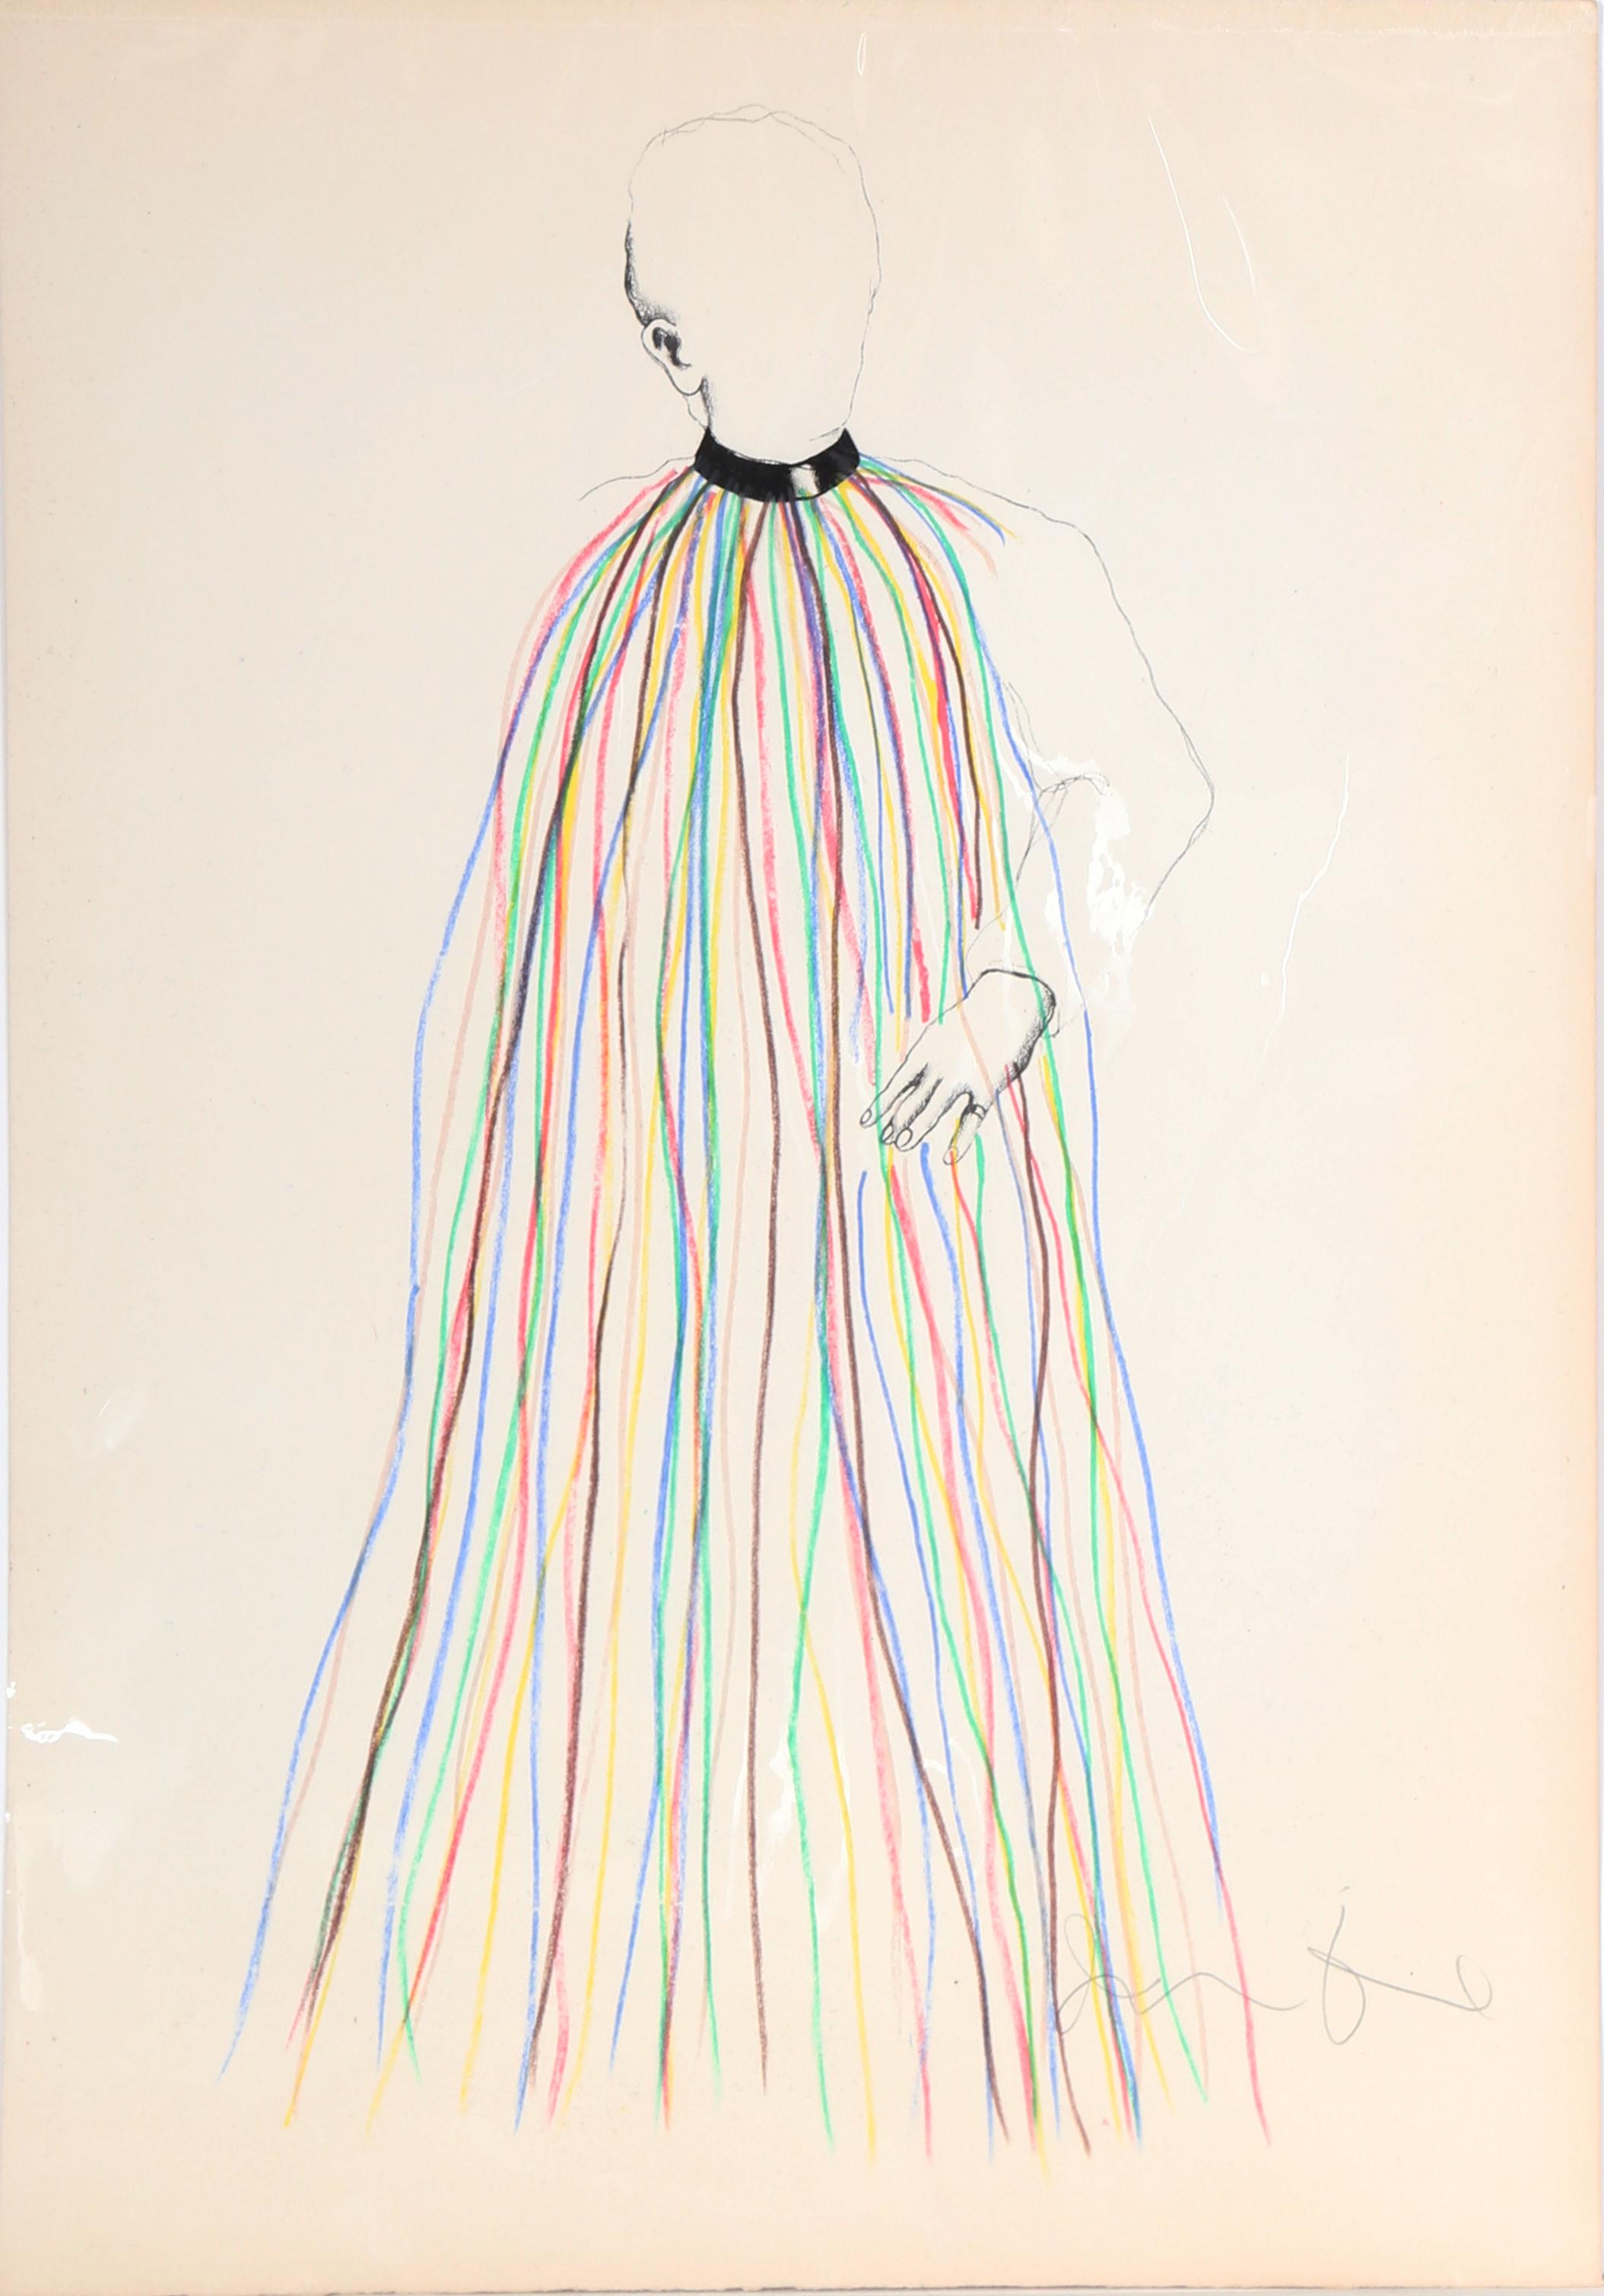 A lithograph by Jim Dine depicting a figure standing in the center of the composition. Although they are faceless, they are ornately decorated in a long dress made of rainbow strings that all meet at a black collar. This print is signed in pencil by